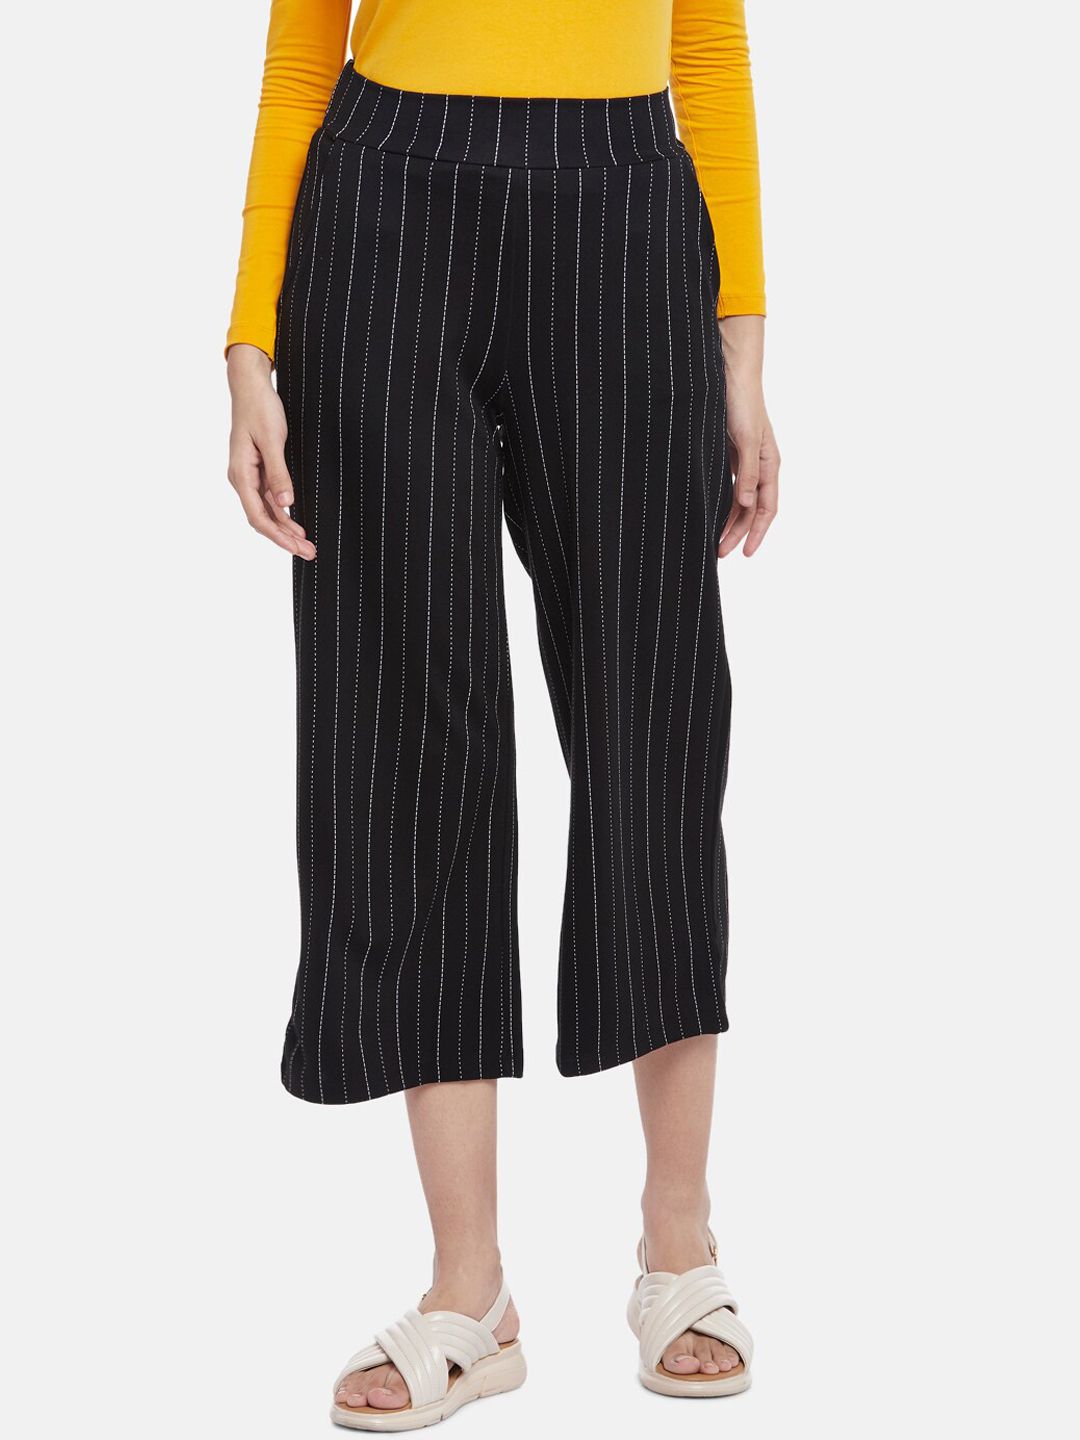 Honey by Pantaloons Women Black Striped Culottes Trousers Price in India